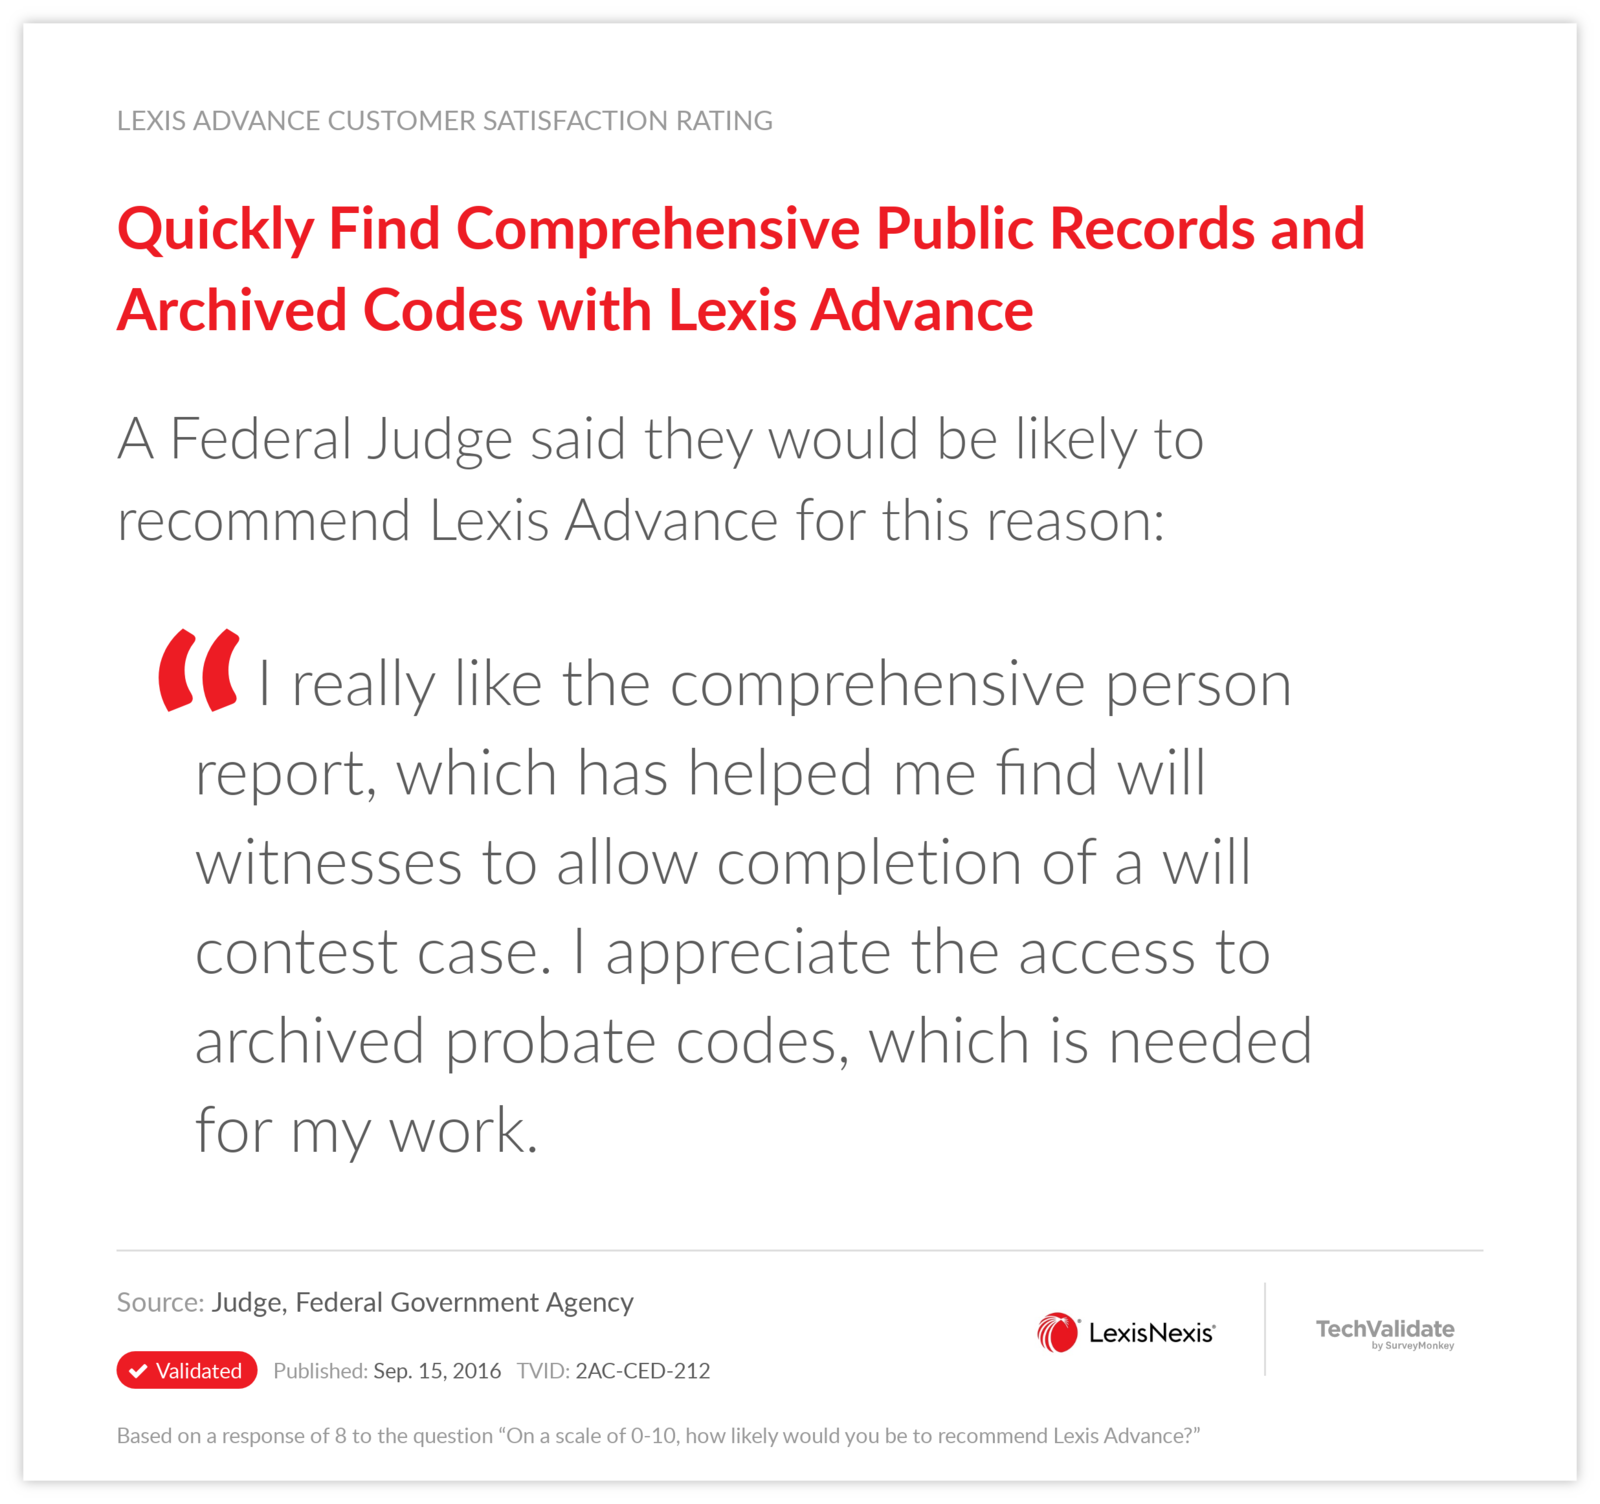 Quickly Find Comprehensive Public Records and Archived Codes with Lexis Advance